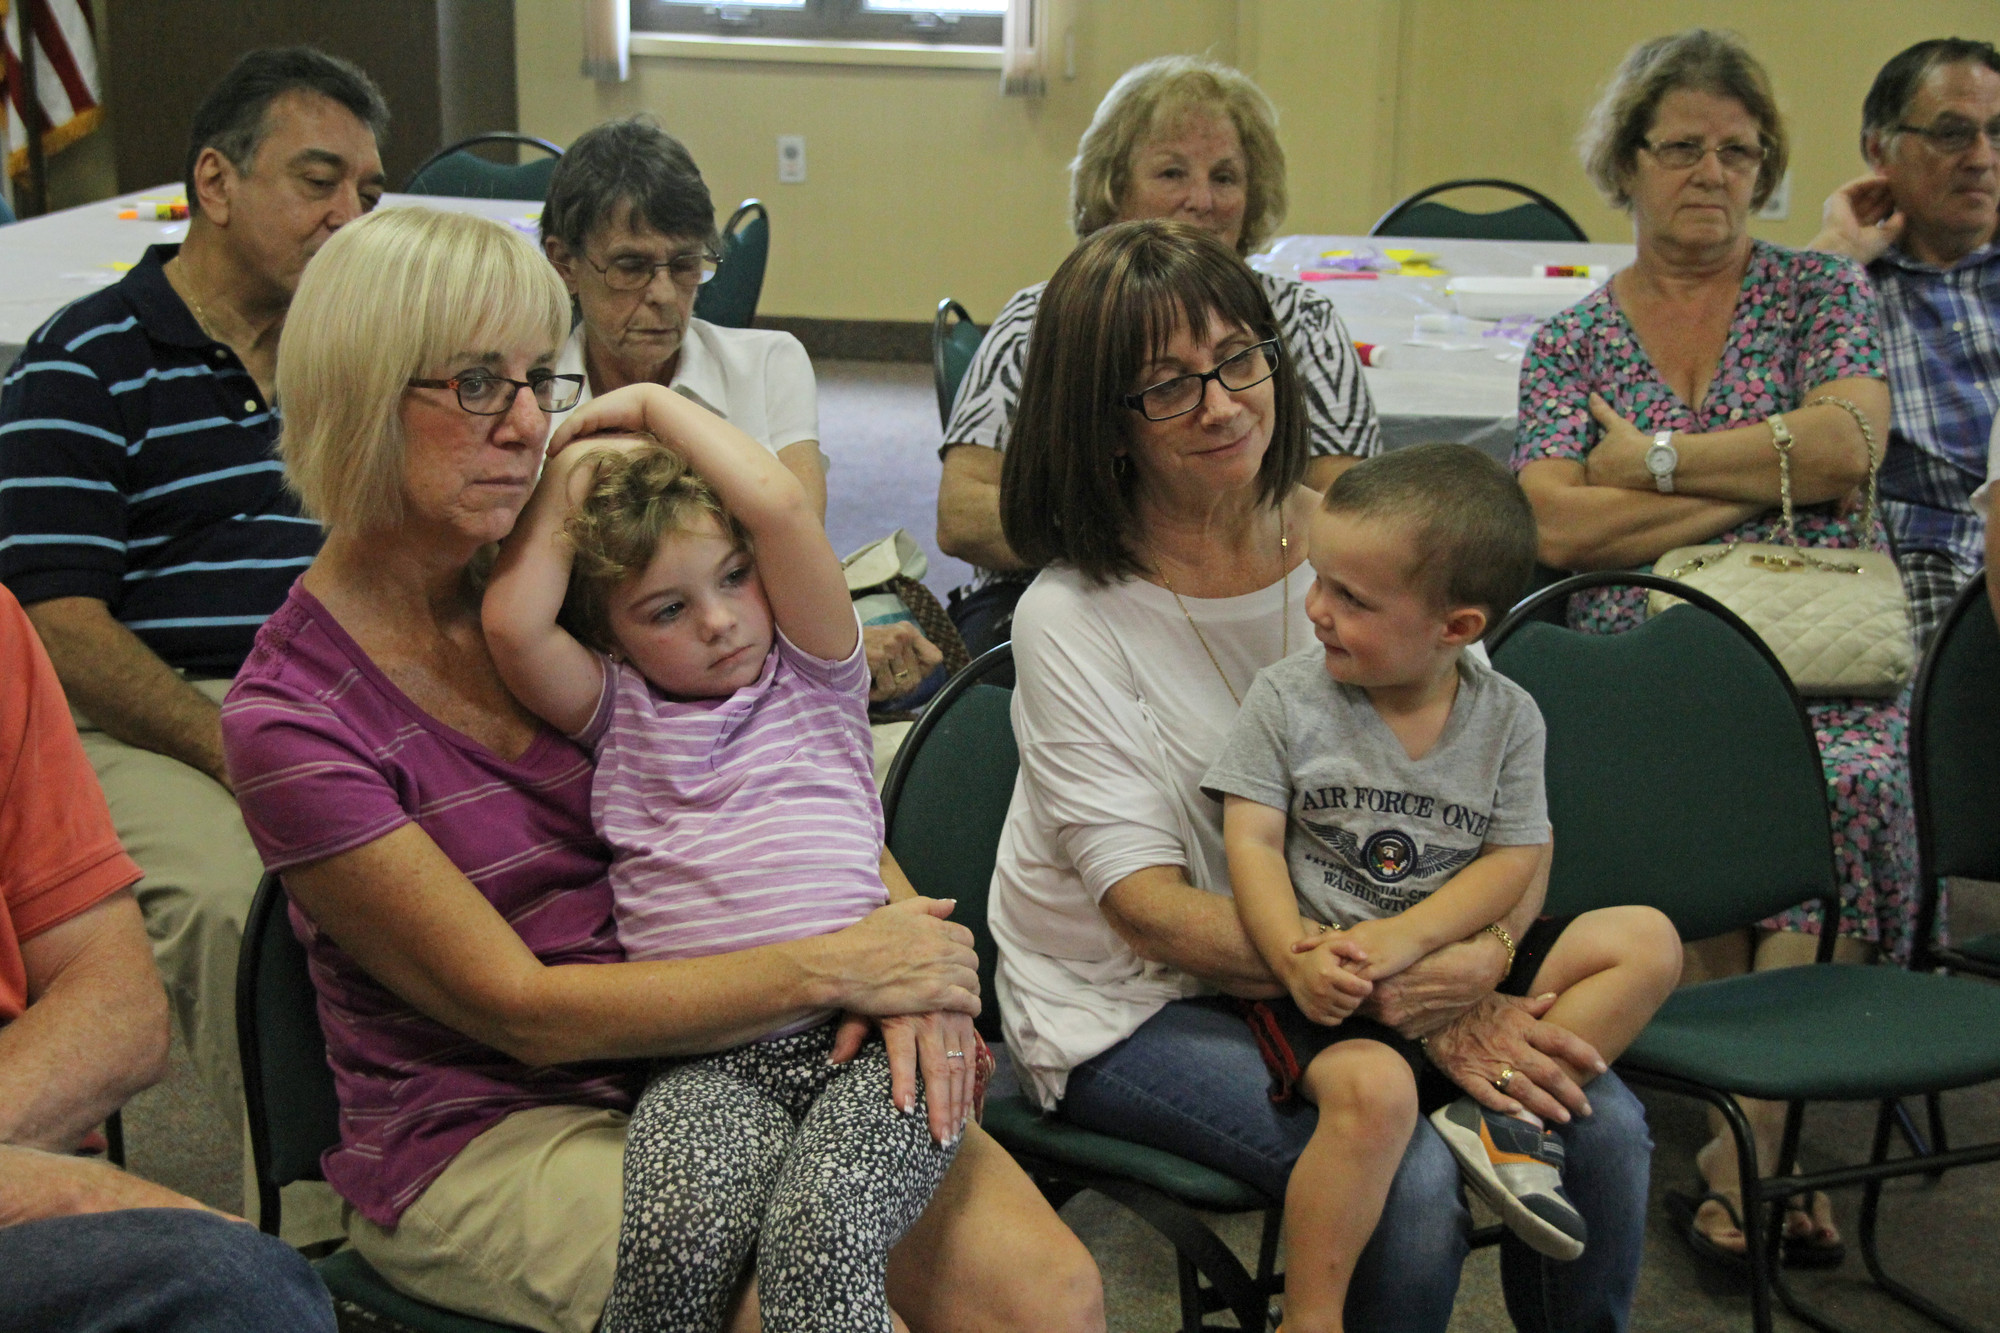 Jen Kushnick and Eileen Lutwick, from left, listened to stories with their respective grandchildren, 4-year-old Ellis Caplinger and 3-year-old Matthew Lutwick.